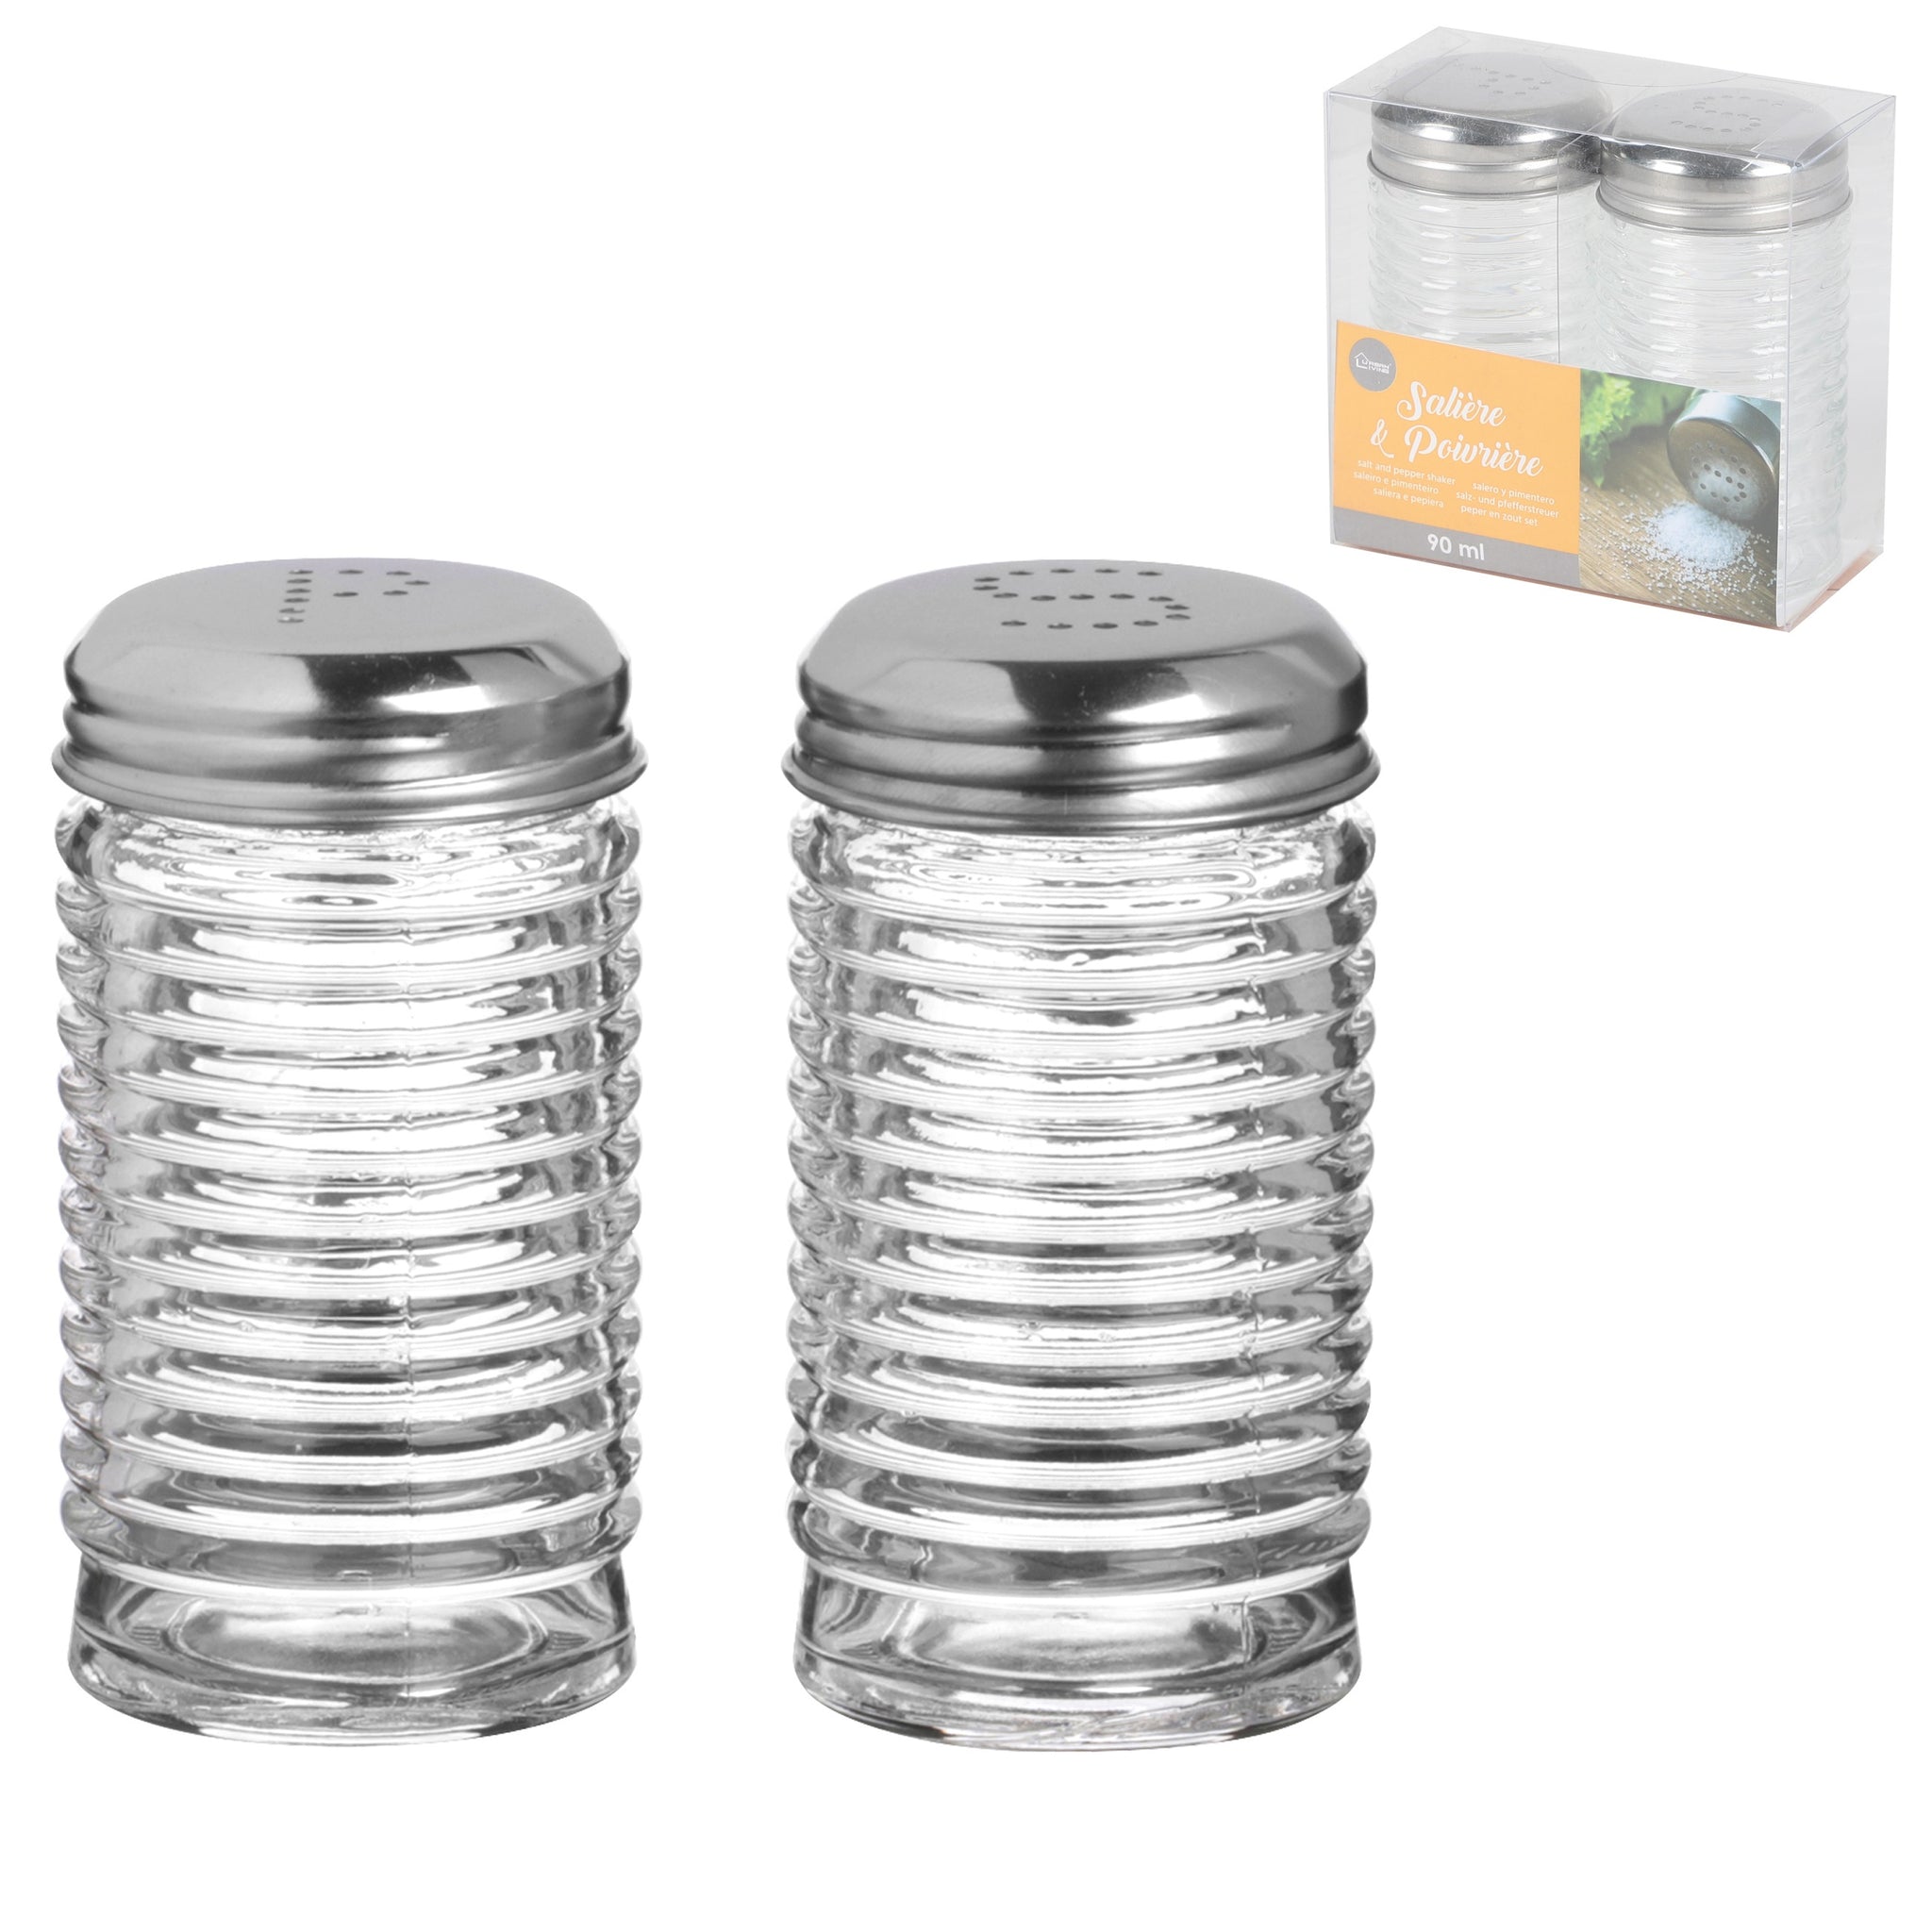 Small Round Shape Glass Salt and Pepper Condiments Holder